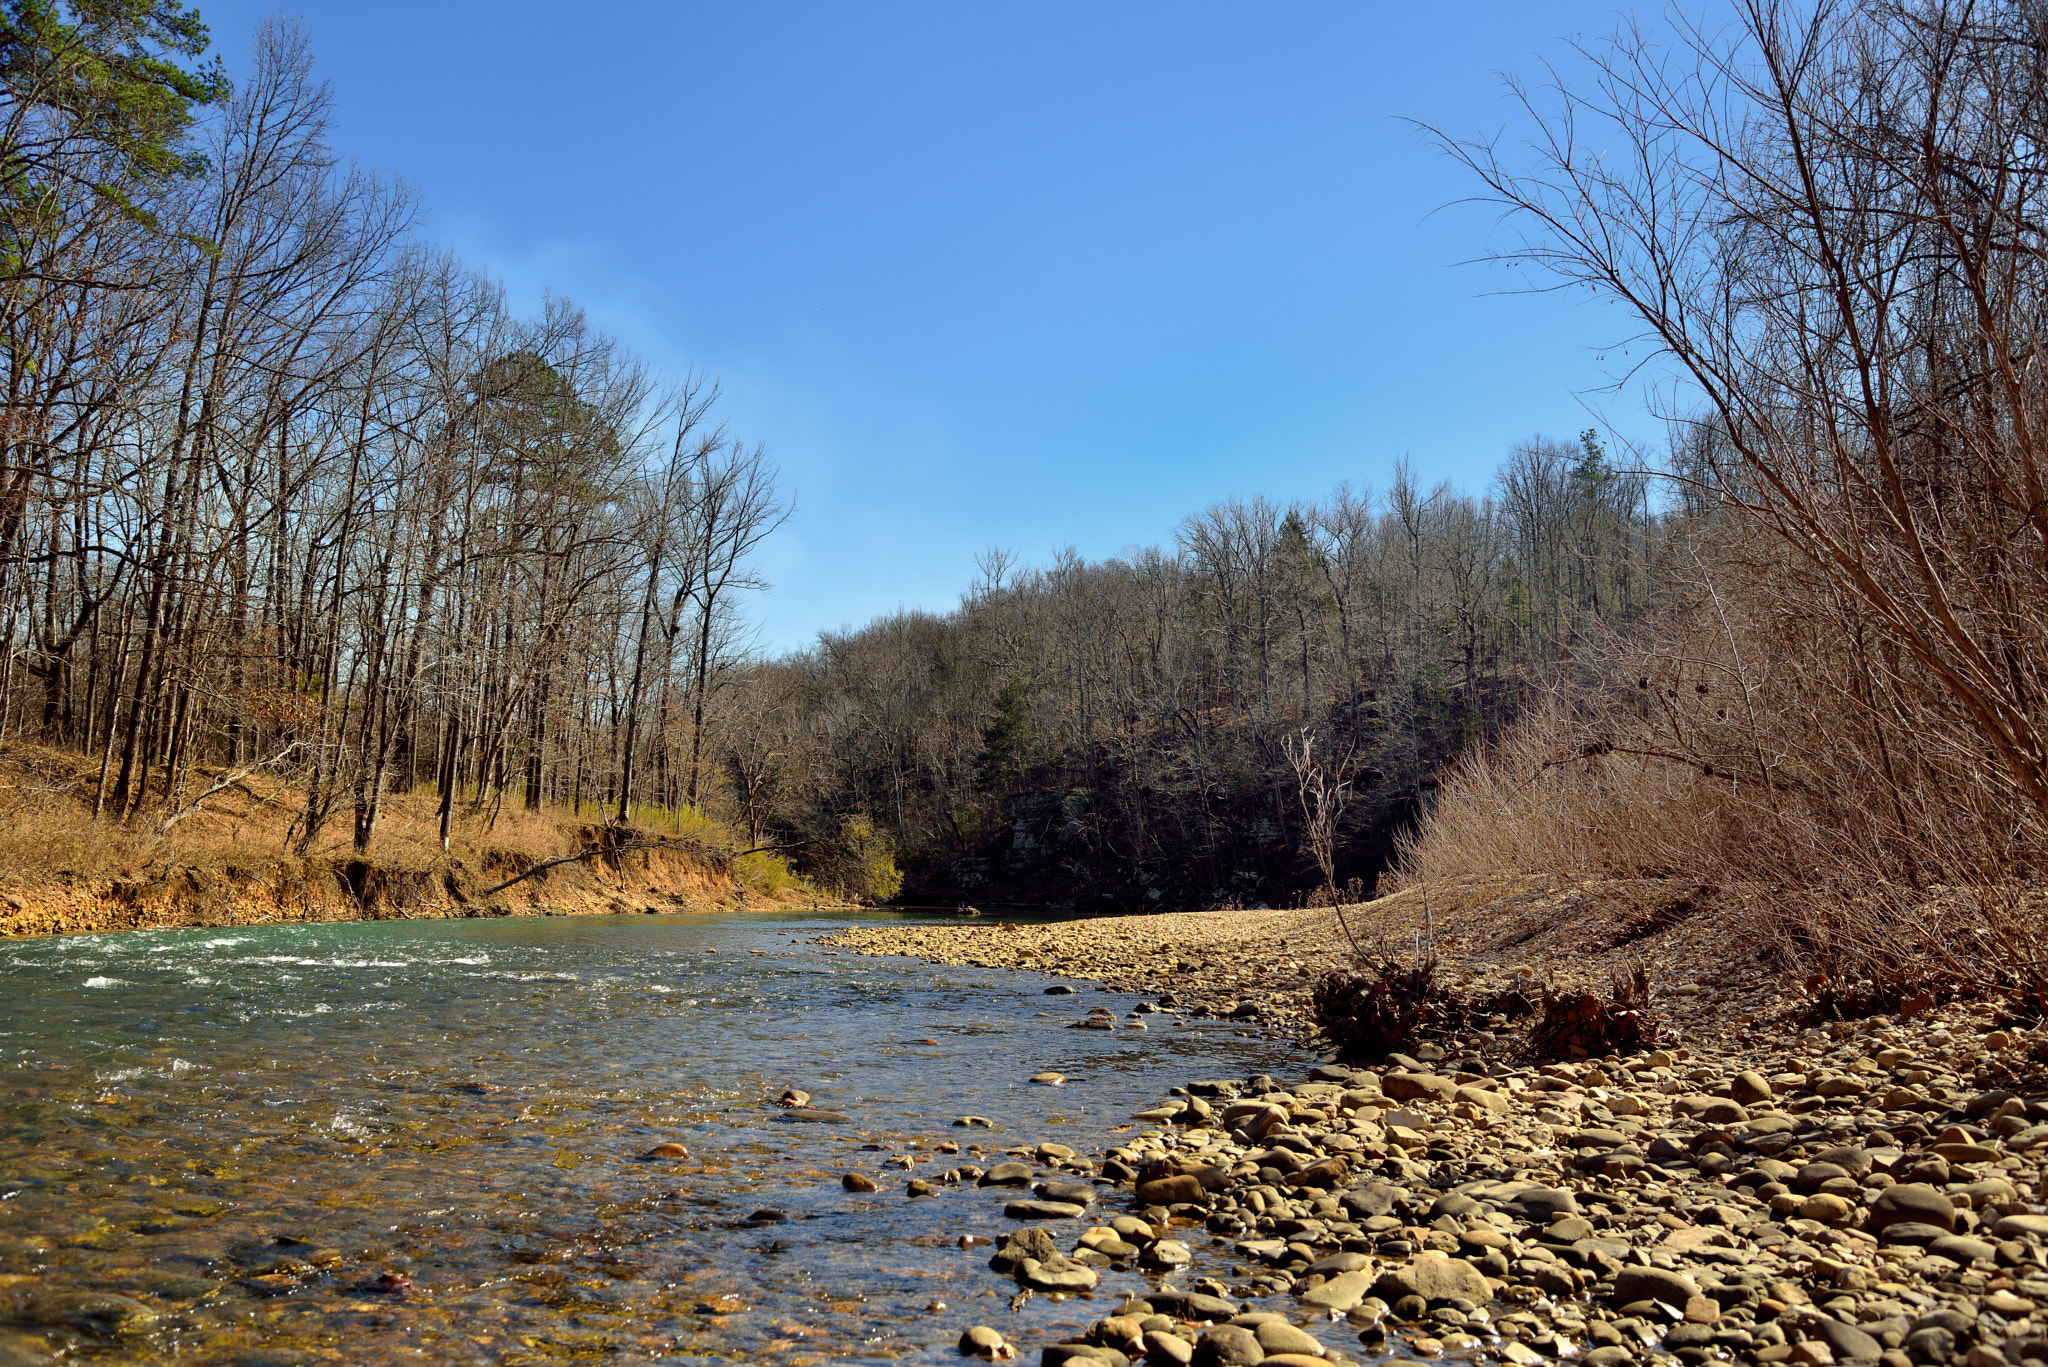 Nikon D800E + Nikon AF-S Nikkor 24-120mm F4G ED VR sample photo. Blue skies above in a setting of hillsides and trees along the buffalo national river photography